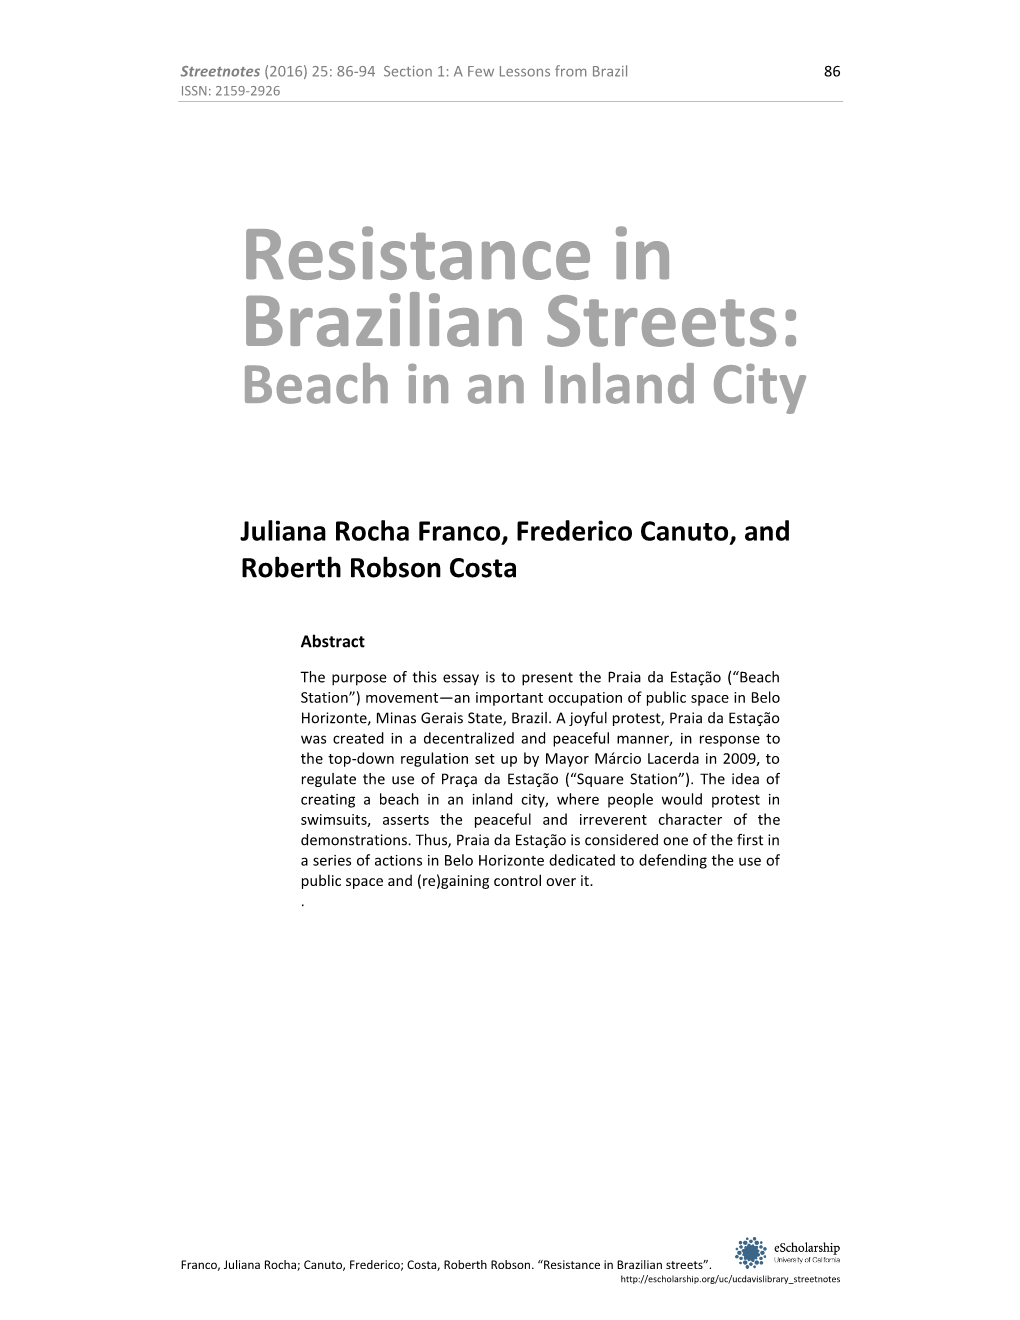 Resistance in Brazilian Streets: Beach in an Inland City